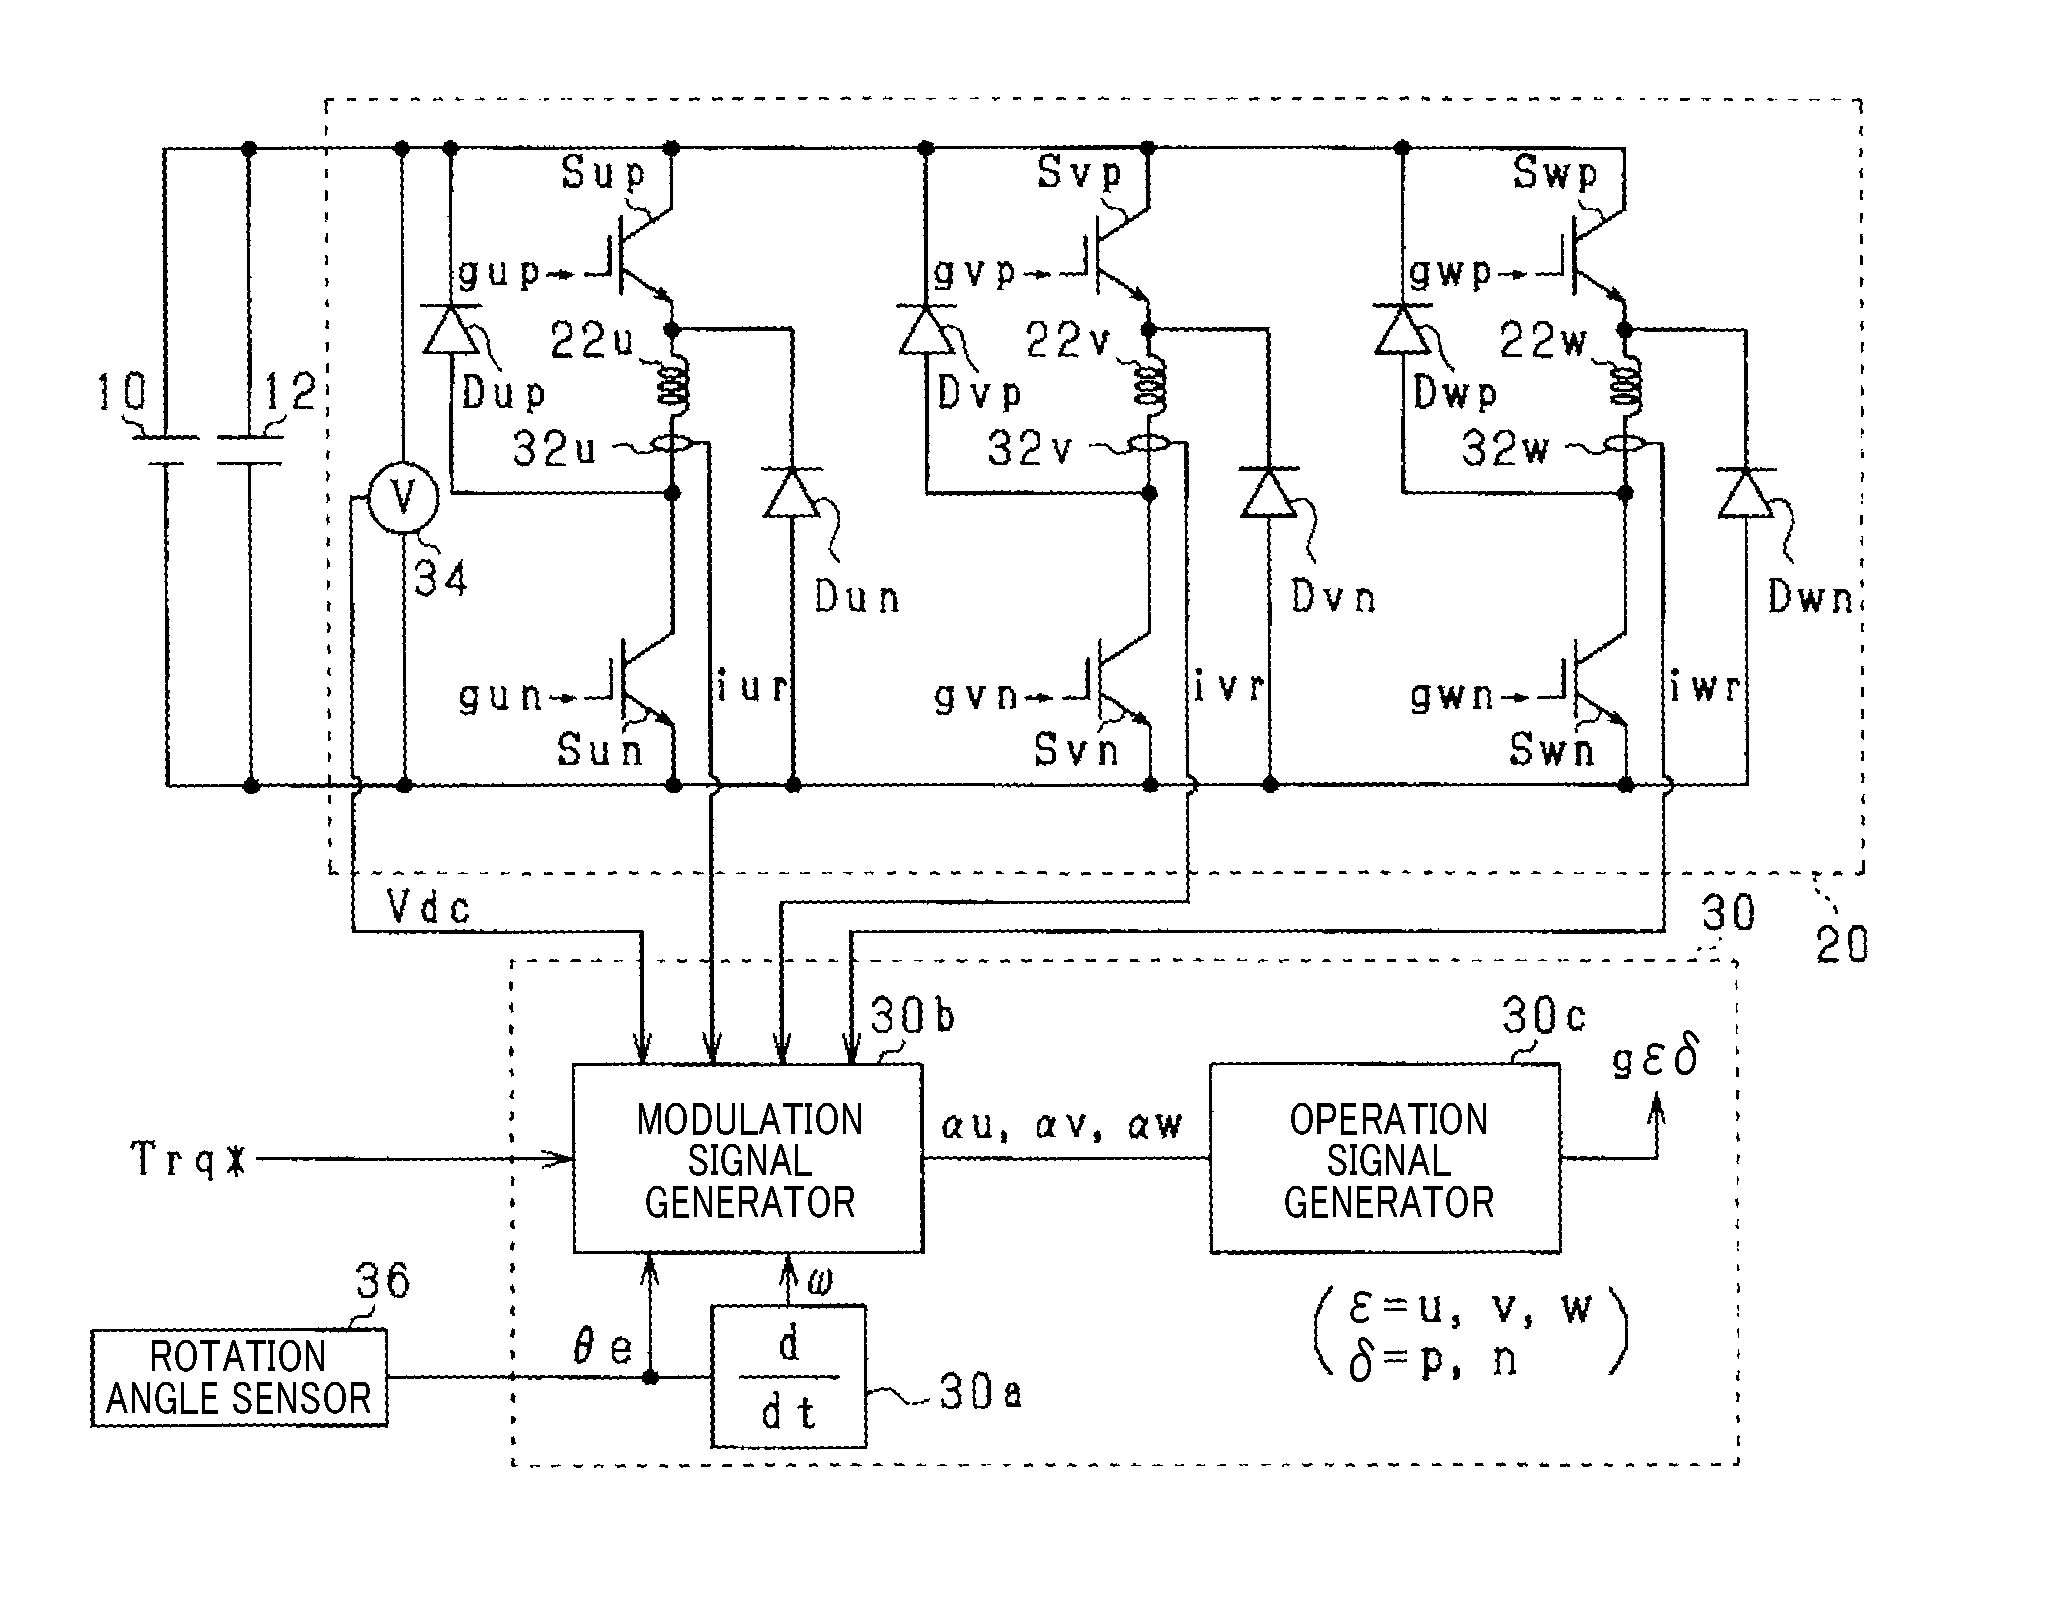 Control apparatus for a switched reluctance motor